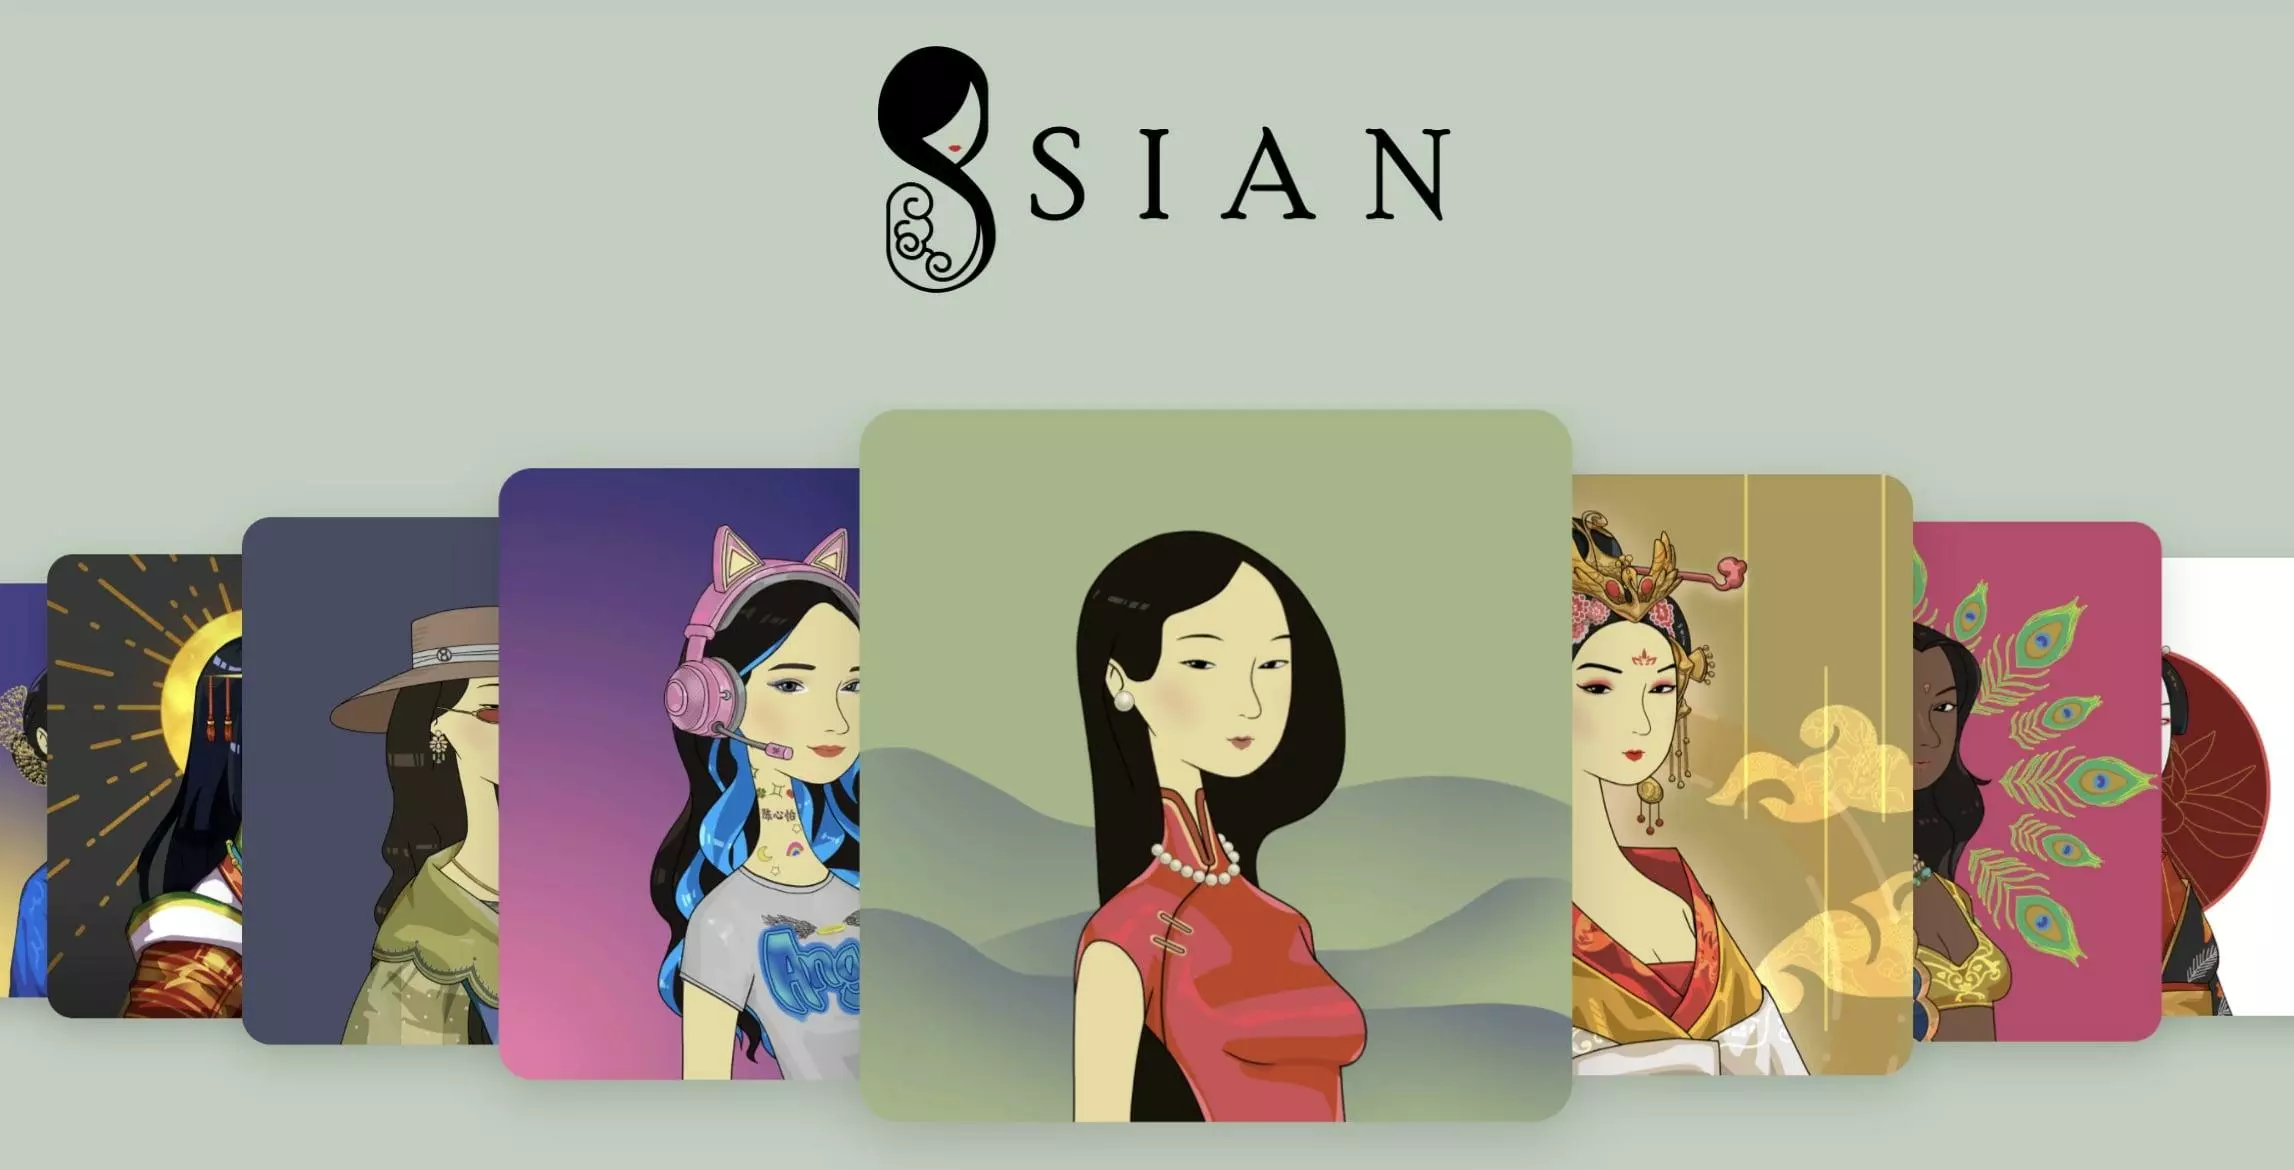 Different Asian women of 8SIAN collection in different attire